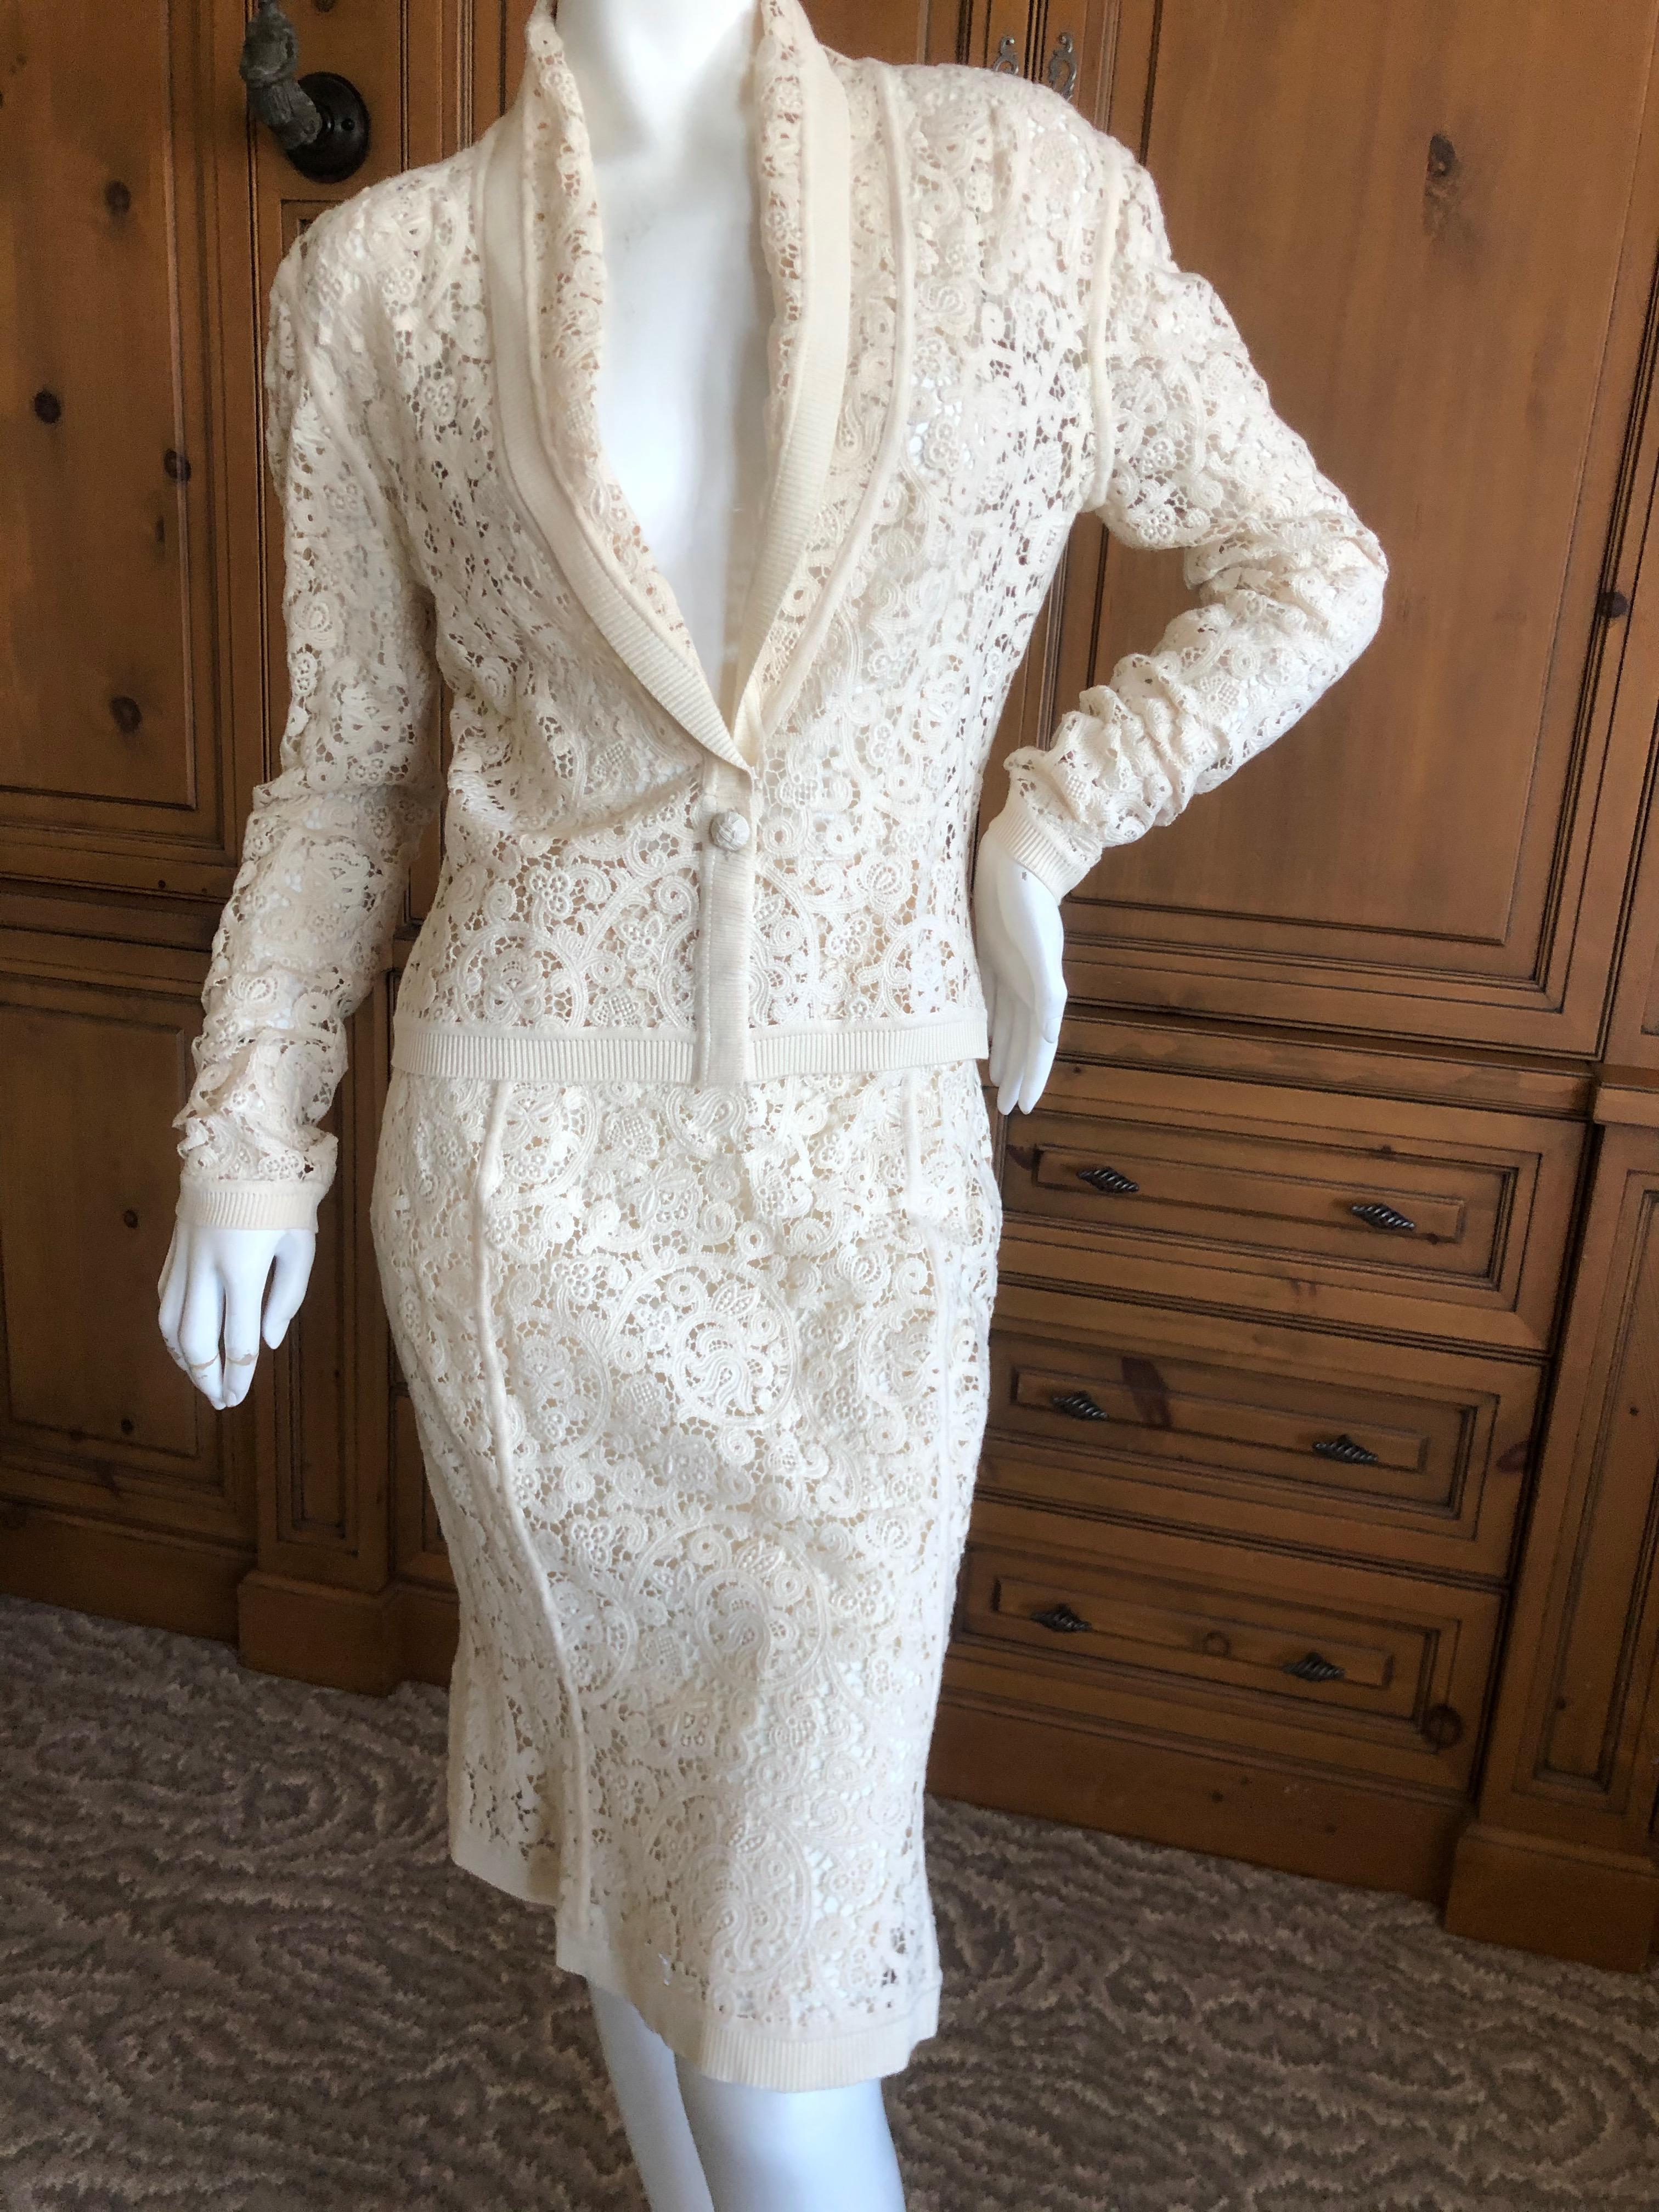 Christian Dior by John Galliano Ivory Lace Skirt Suit with Ribbed Trim
Size M
Bust 36